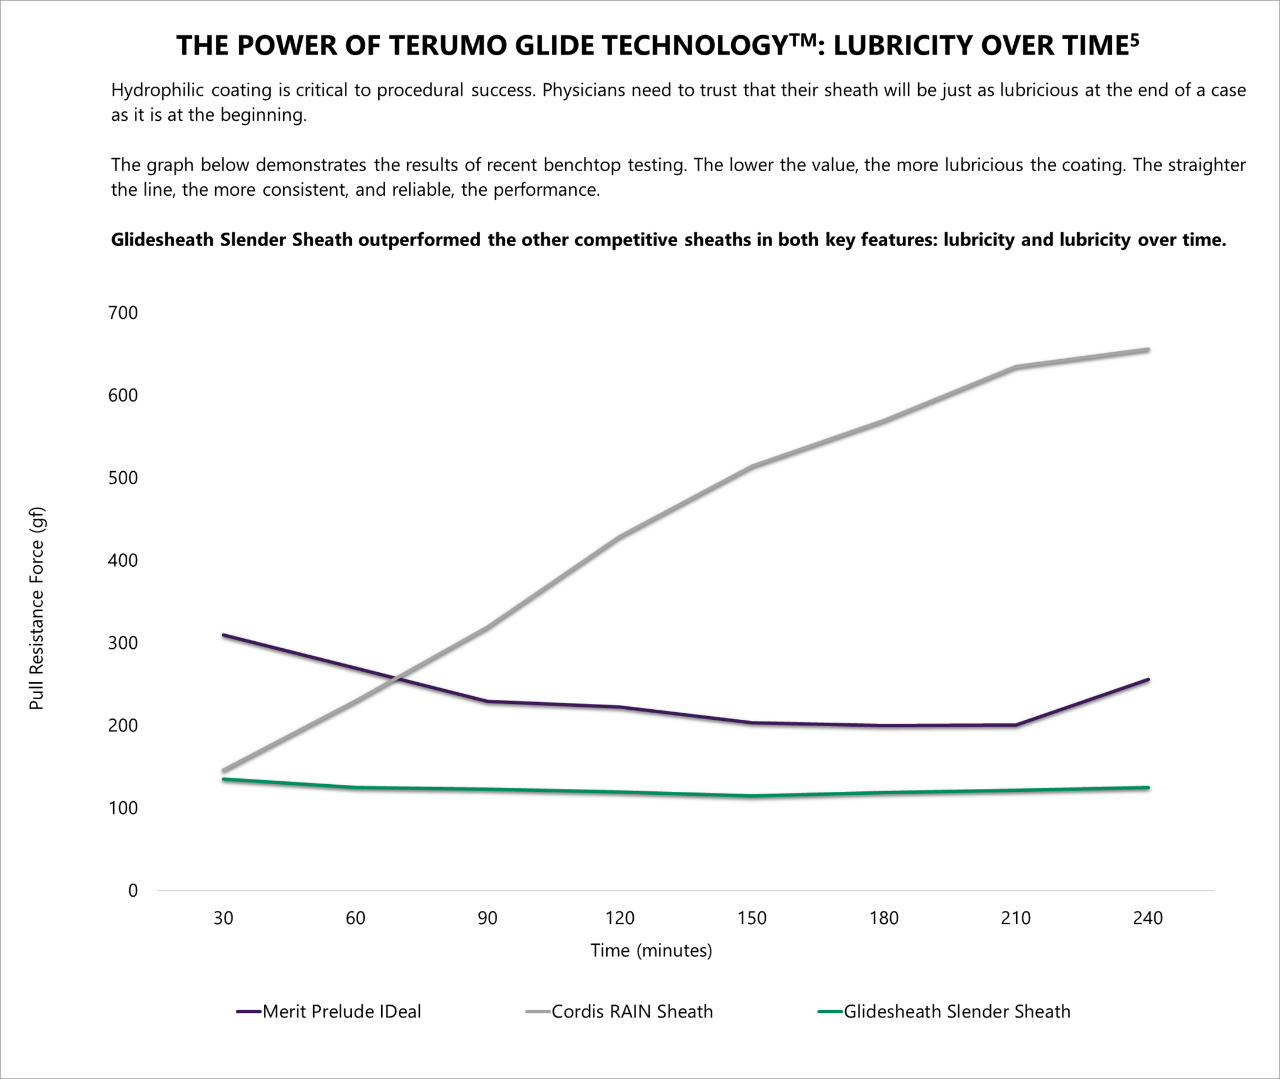 The Power of Terumo Glide Technology™: Lubricity over time